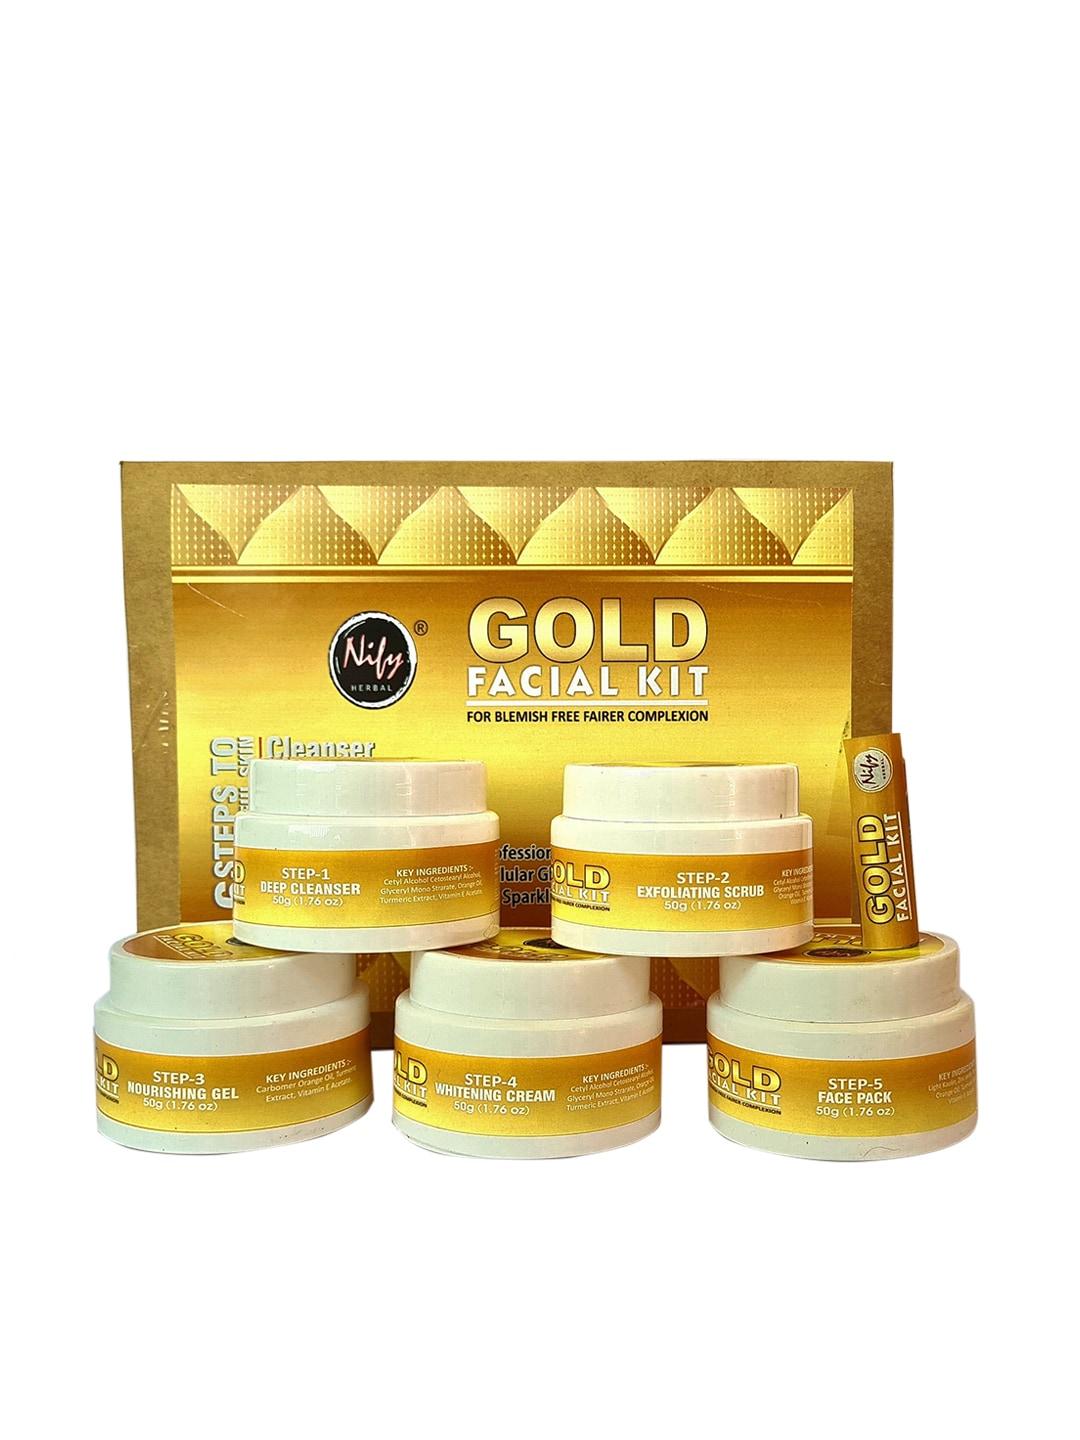 nify herbal gold facial kit for blemish free fairer complexion - 250 g